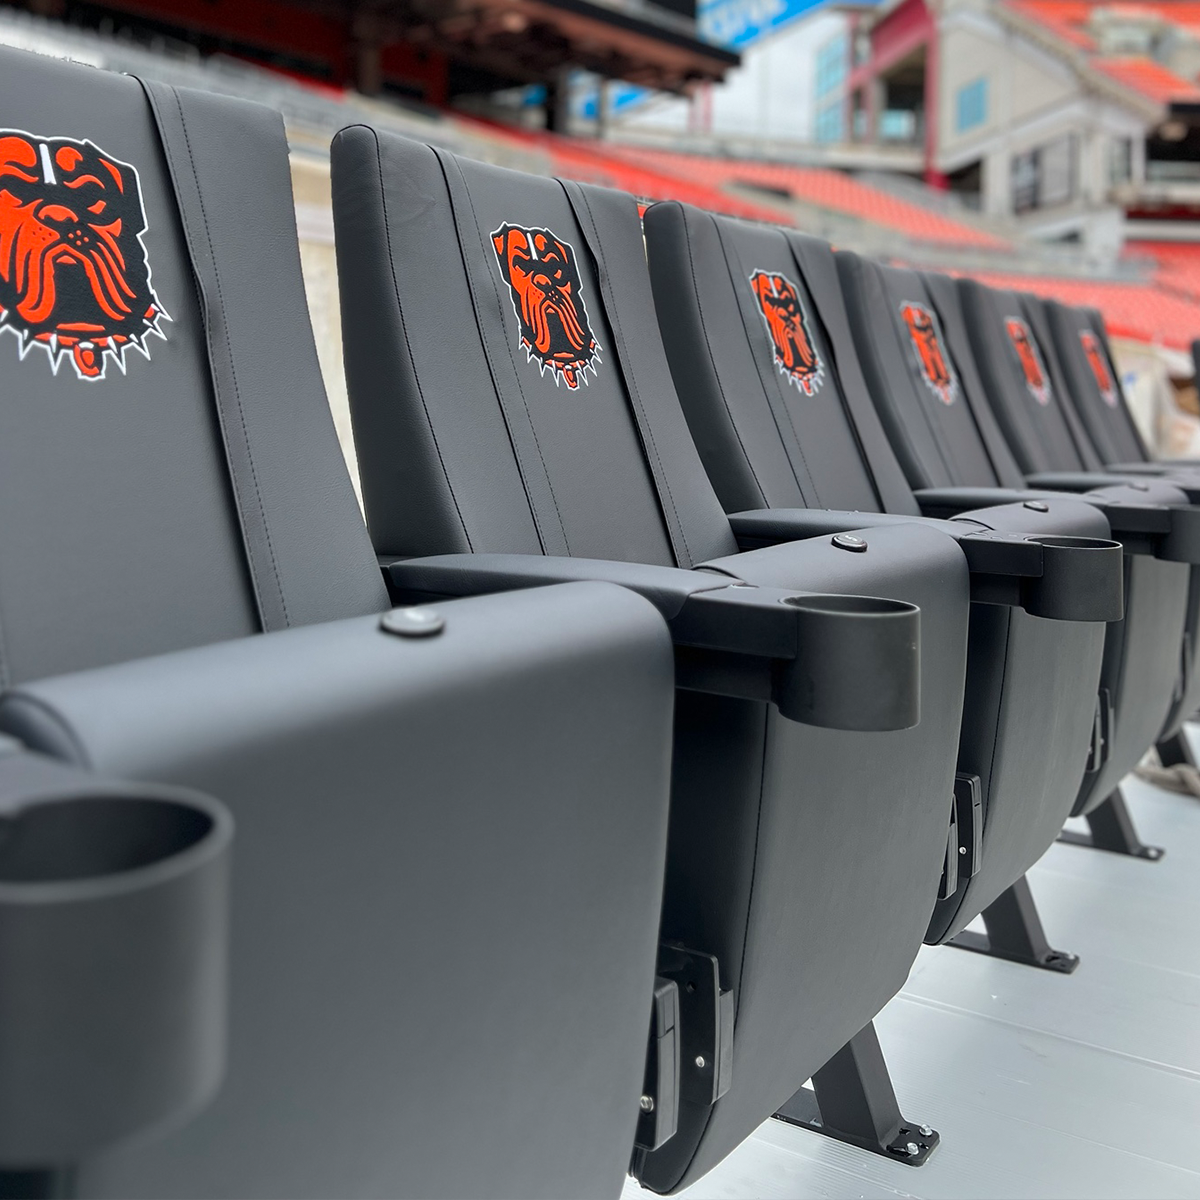 SuiteMax 3.5 VIP Seats with Tennessee Titans Helmet Logo